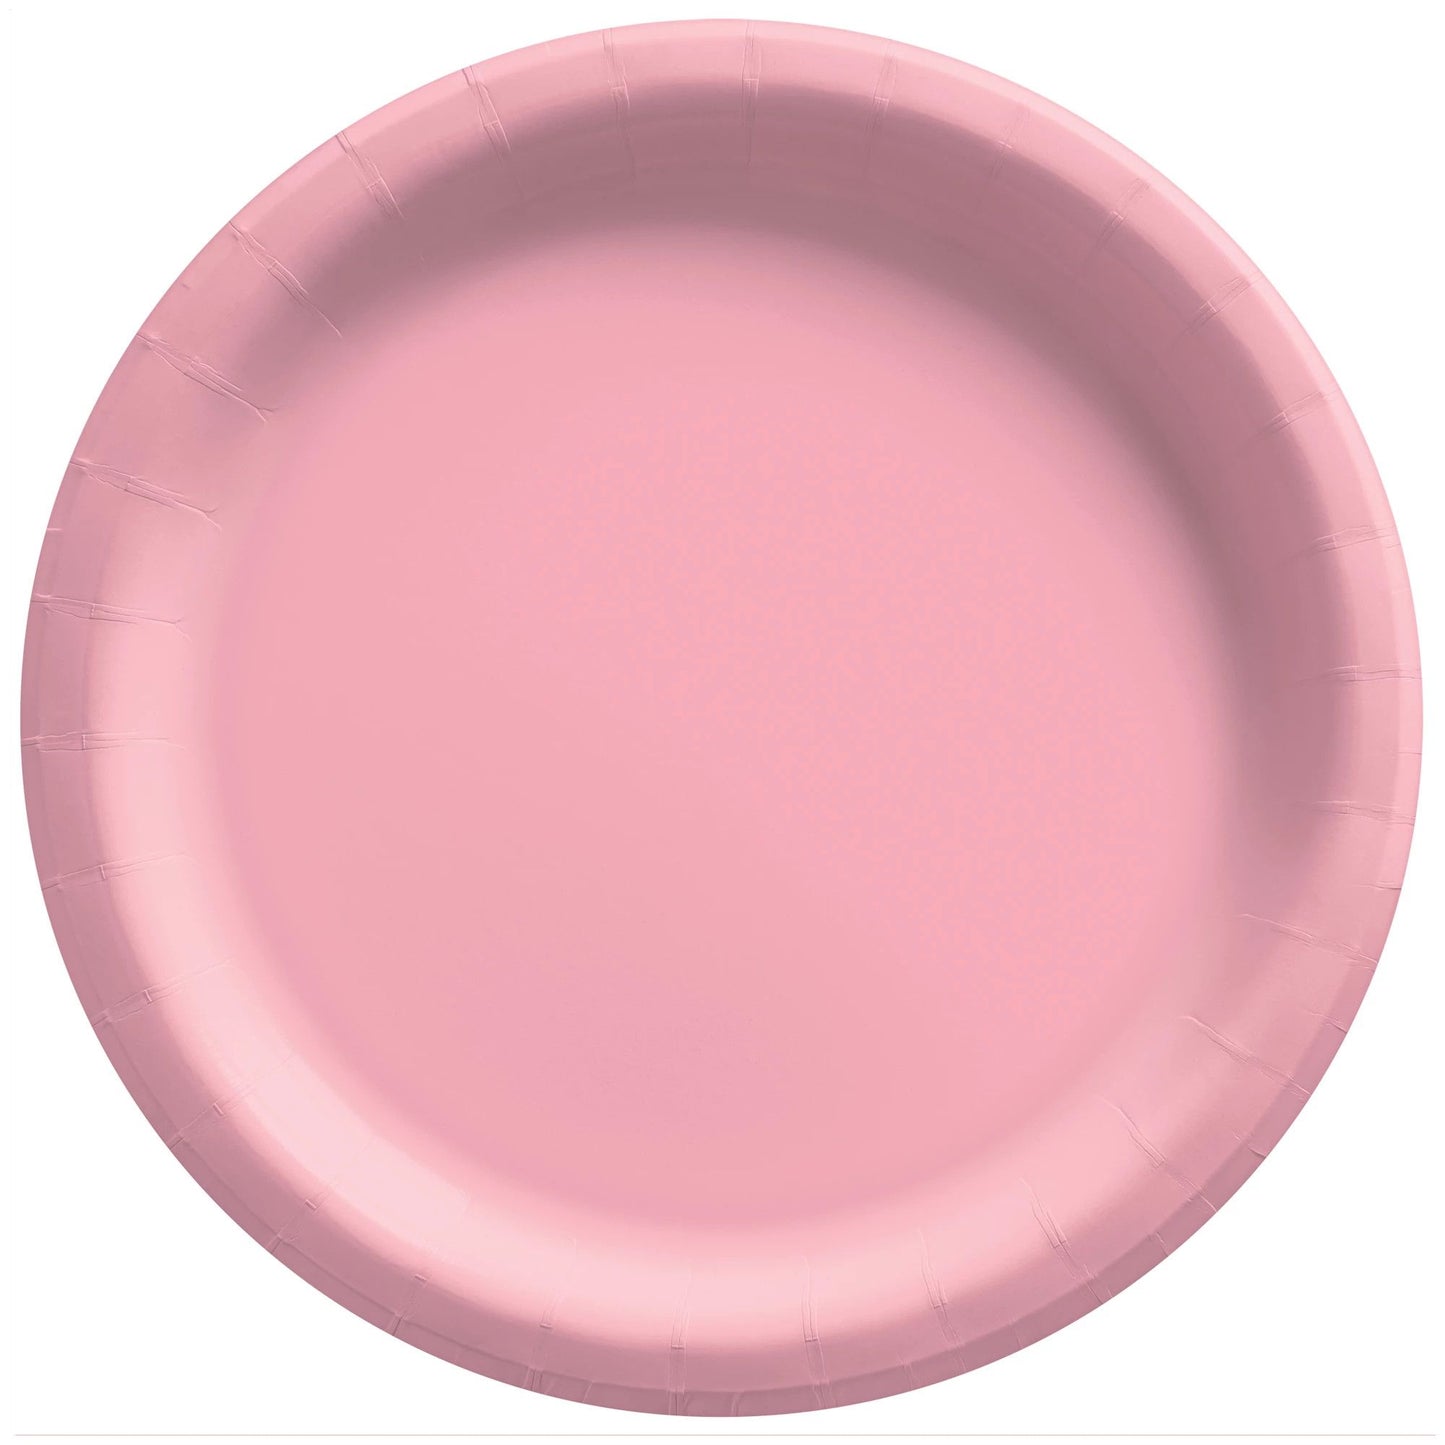 Extra Sturdy New Pink Party 10in Paper Plates, 50 ct